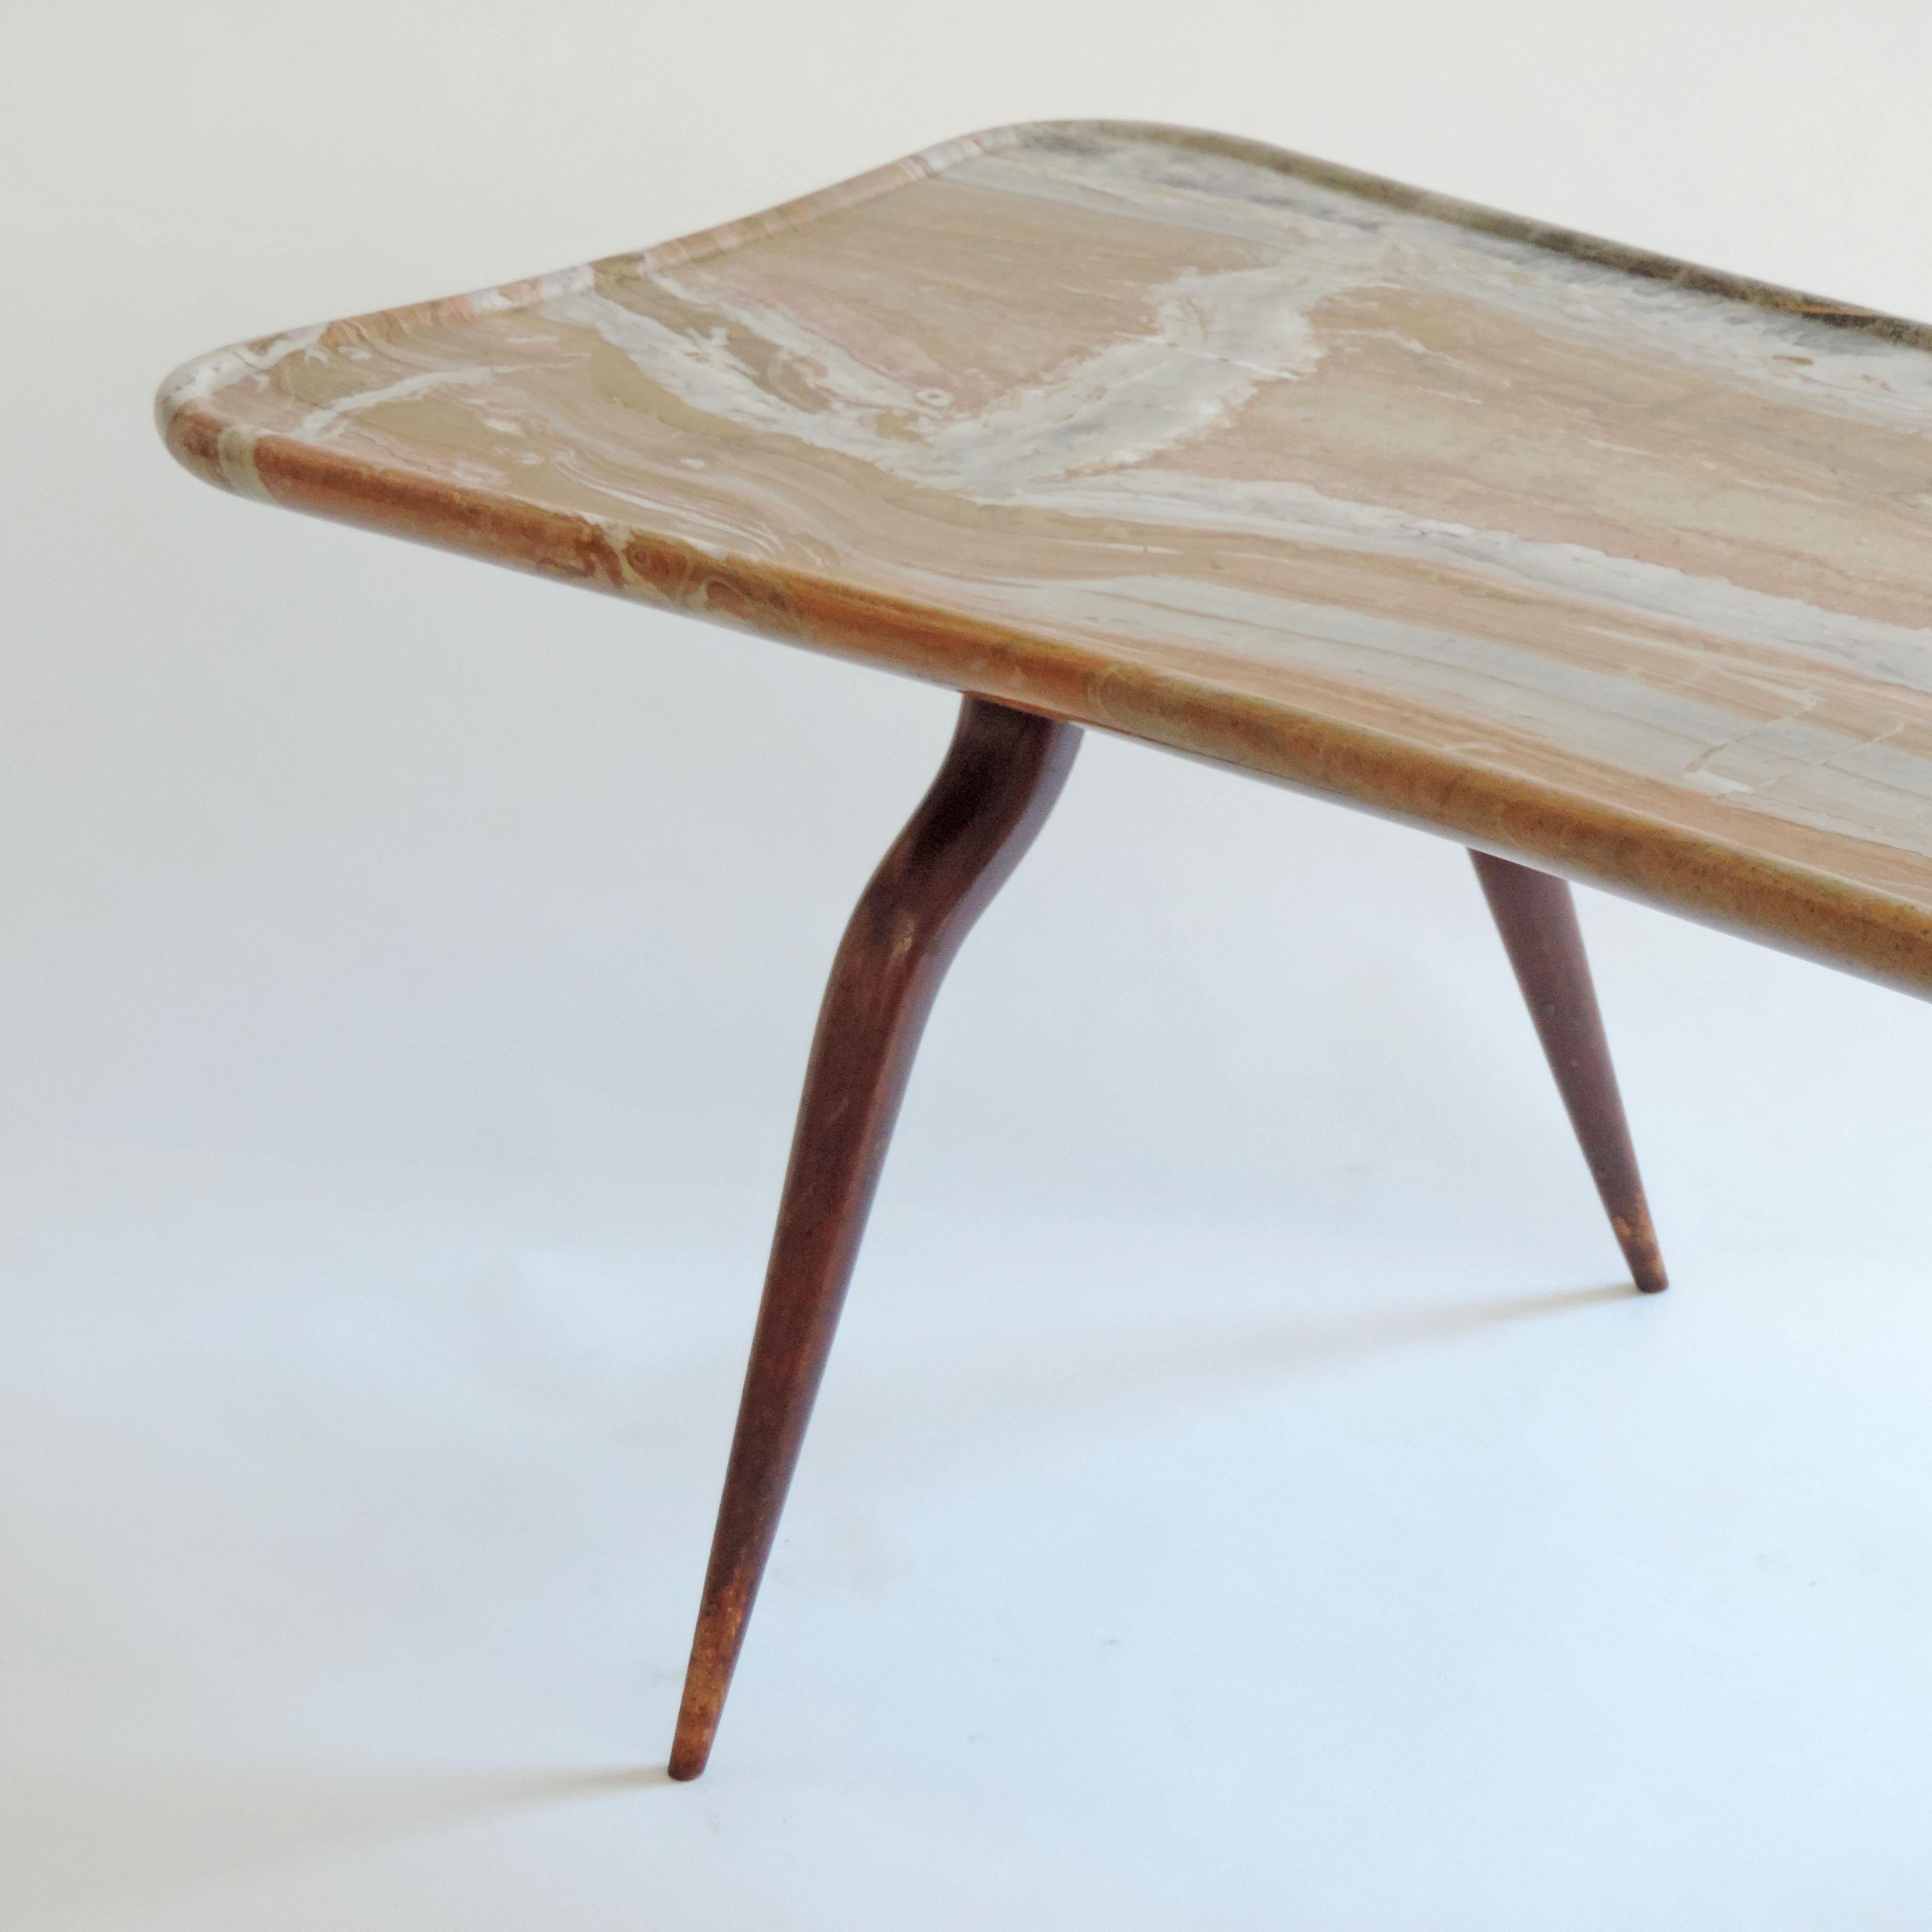 Mid-Century Modern Surrealist Fabrizio Clerici Coffee Table in Wood and Marble, Italy, 1940s For Sale